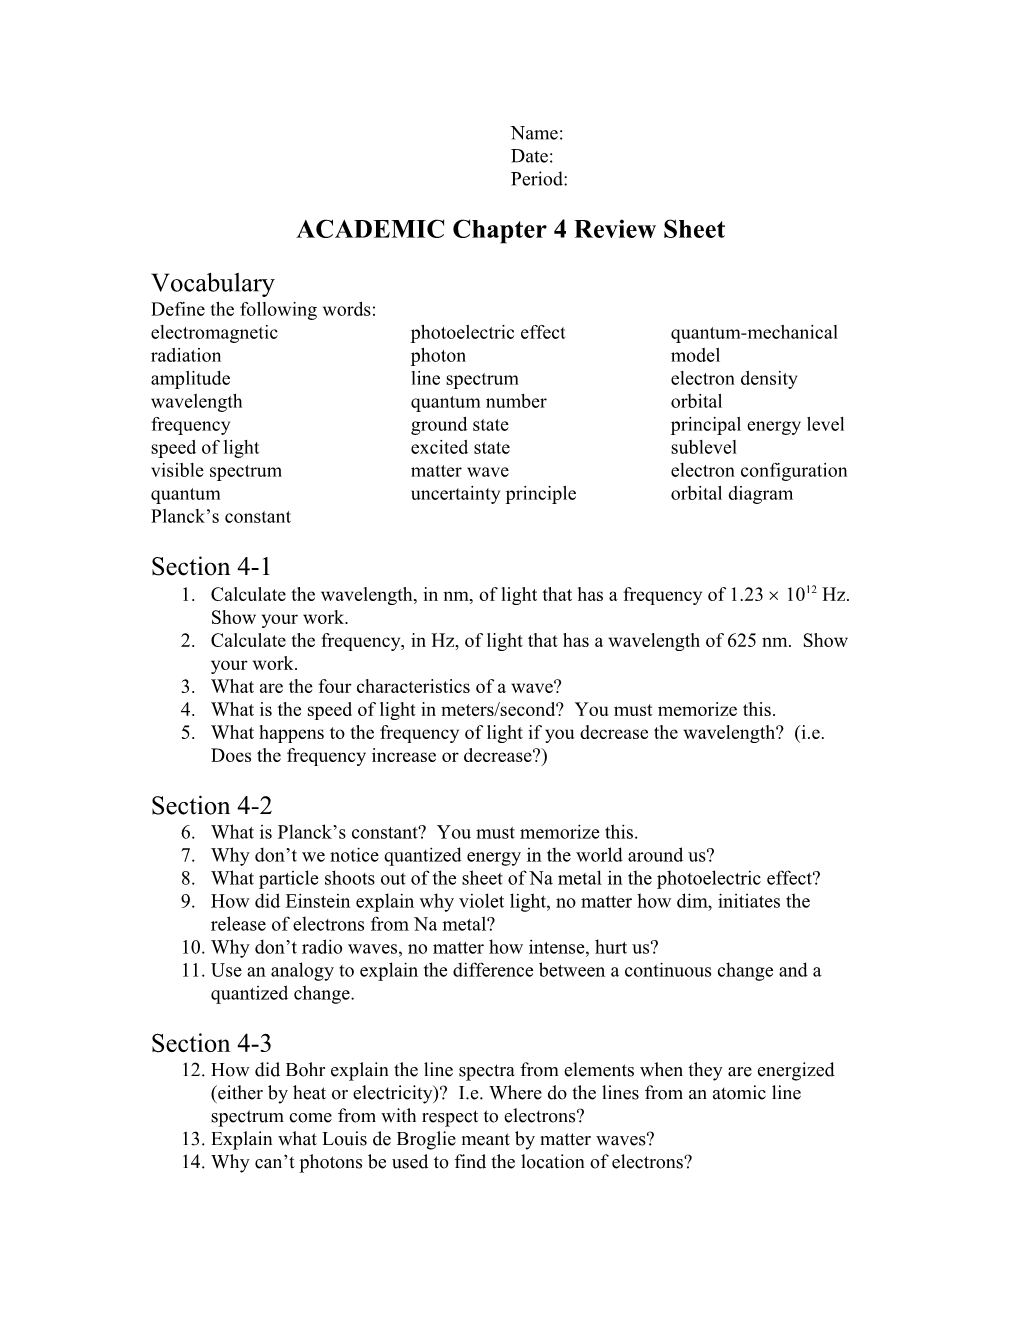 ACADEMIC Chapter 4 Review Sheet